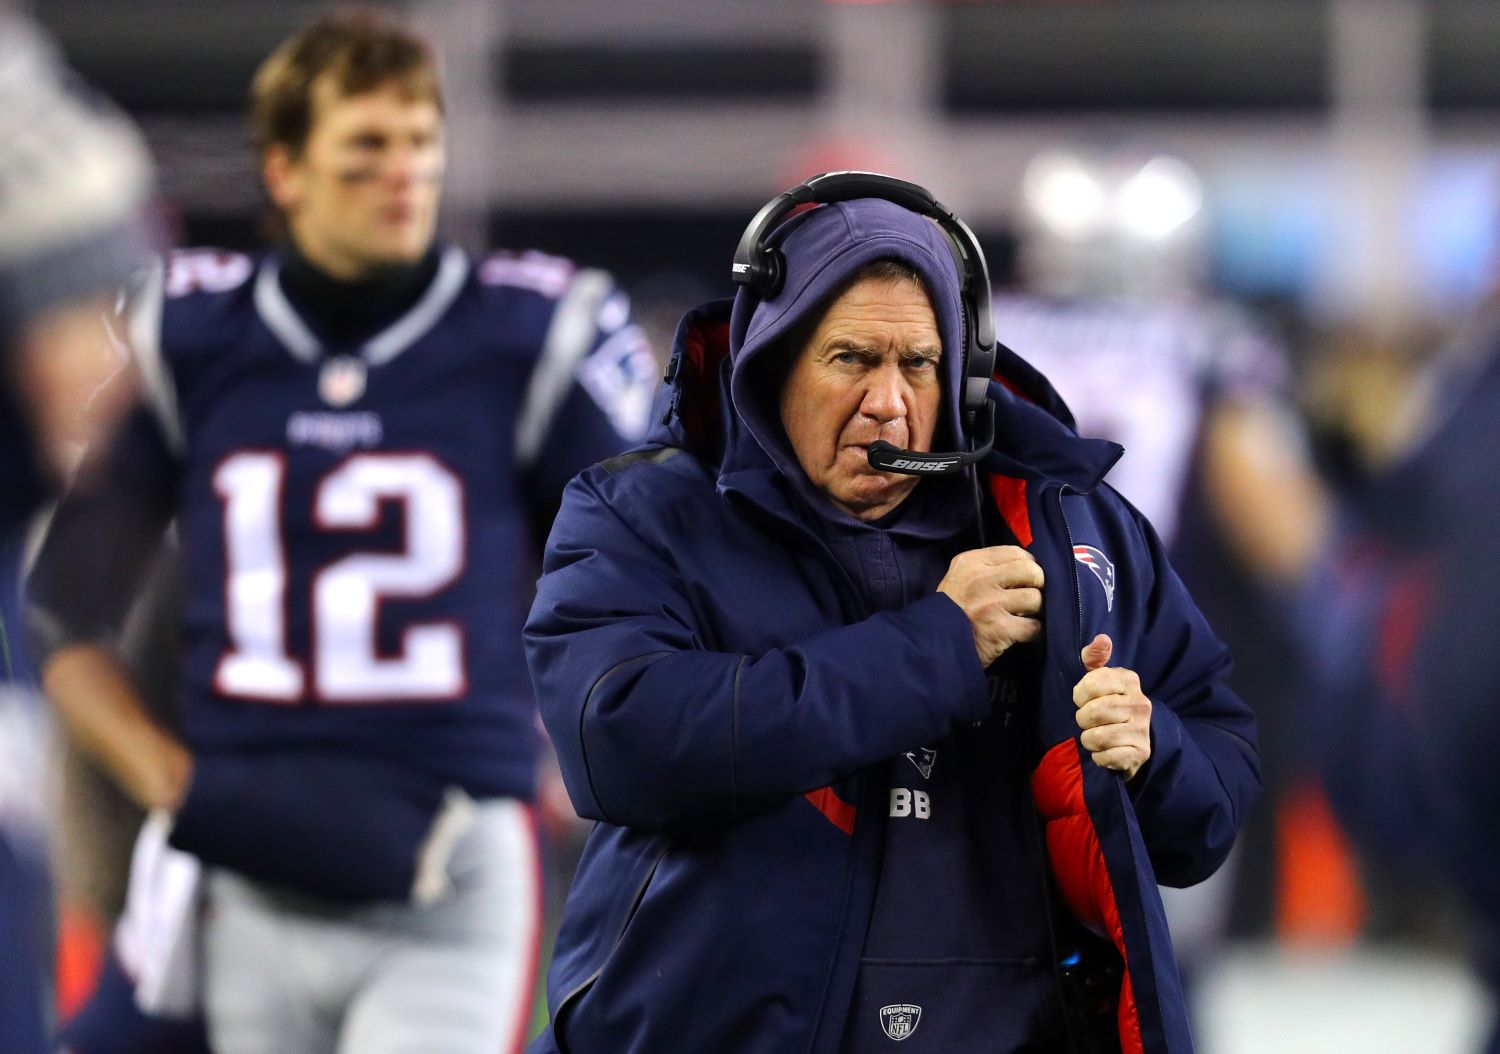 Tom Brady may be a rich man, but the Patriots legend is missing more than $60 million from his bank account because of Bill Belichick.